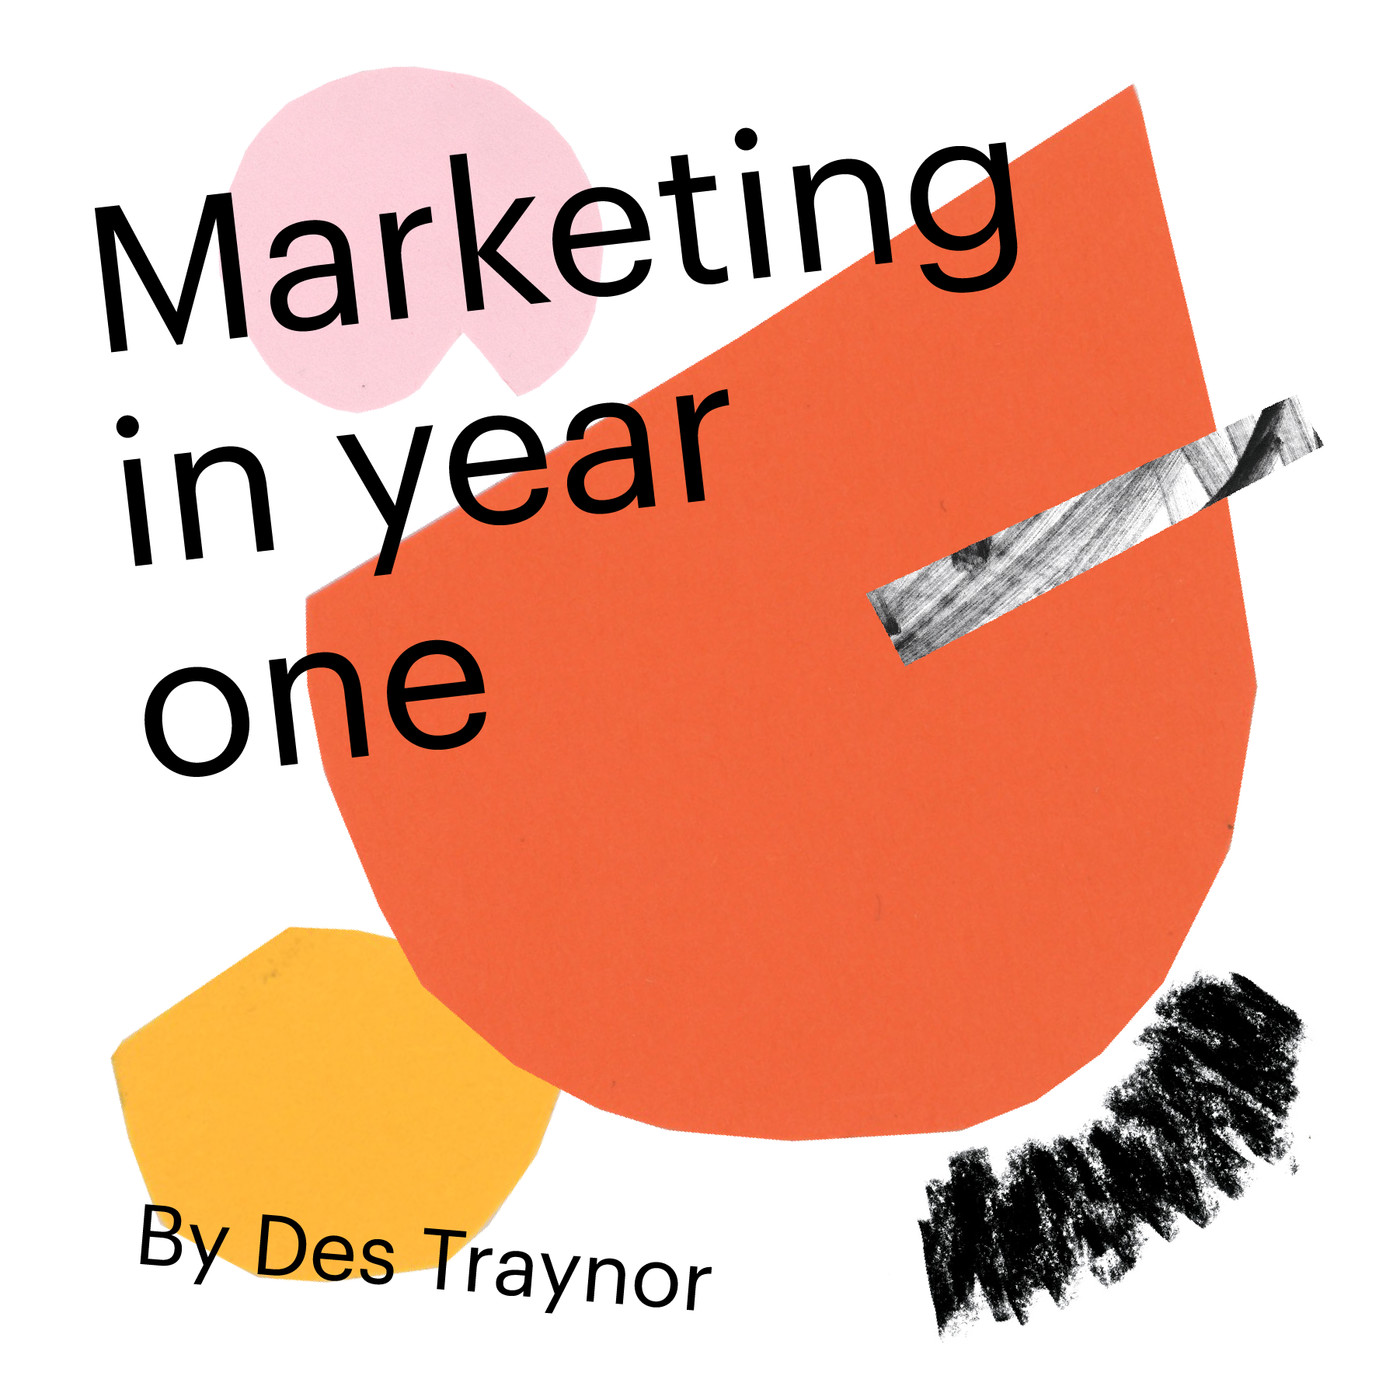 Chapter 1: Marketing in year one